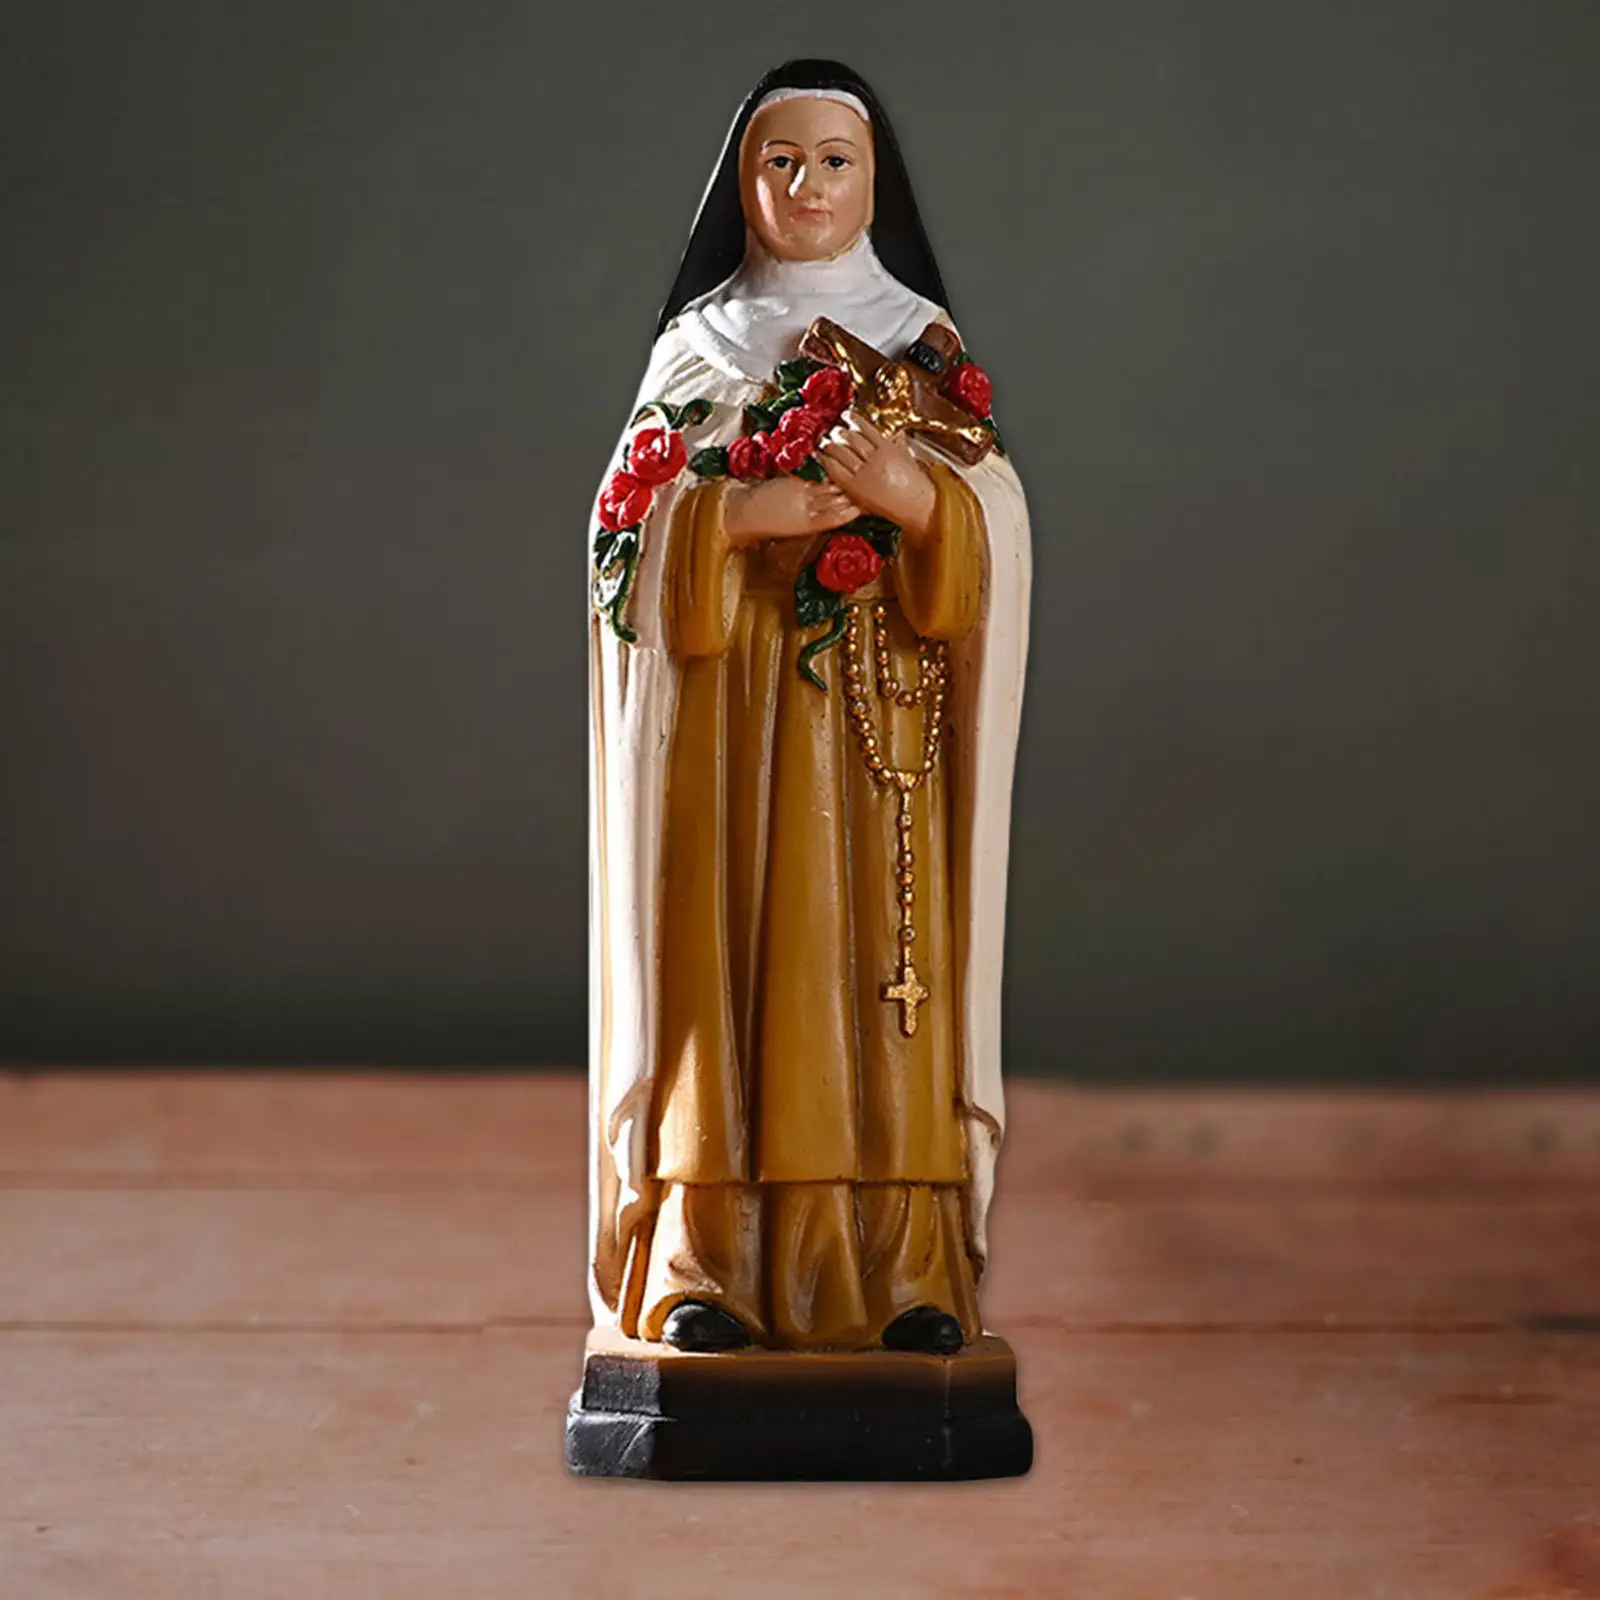 21cm Religious Display Virgin Mary Statue Resin Figurine Sculpture Figure Crafts for Christian Church